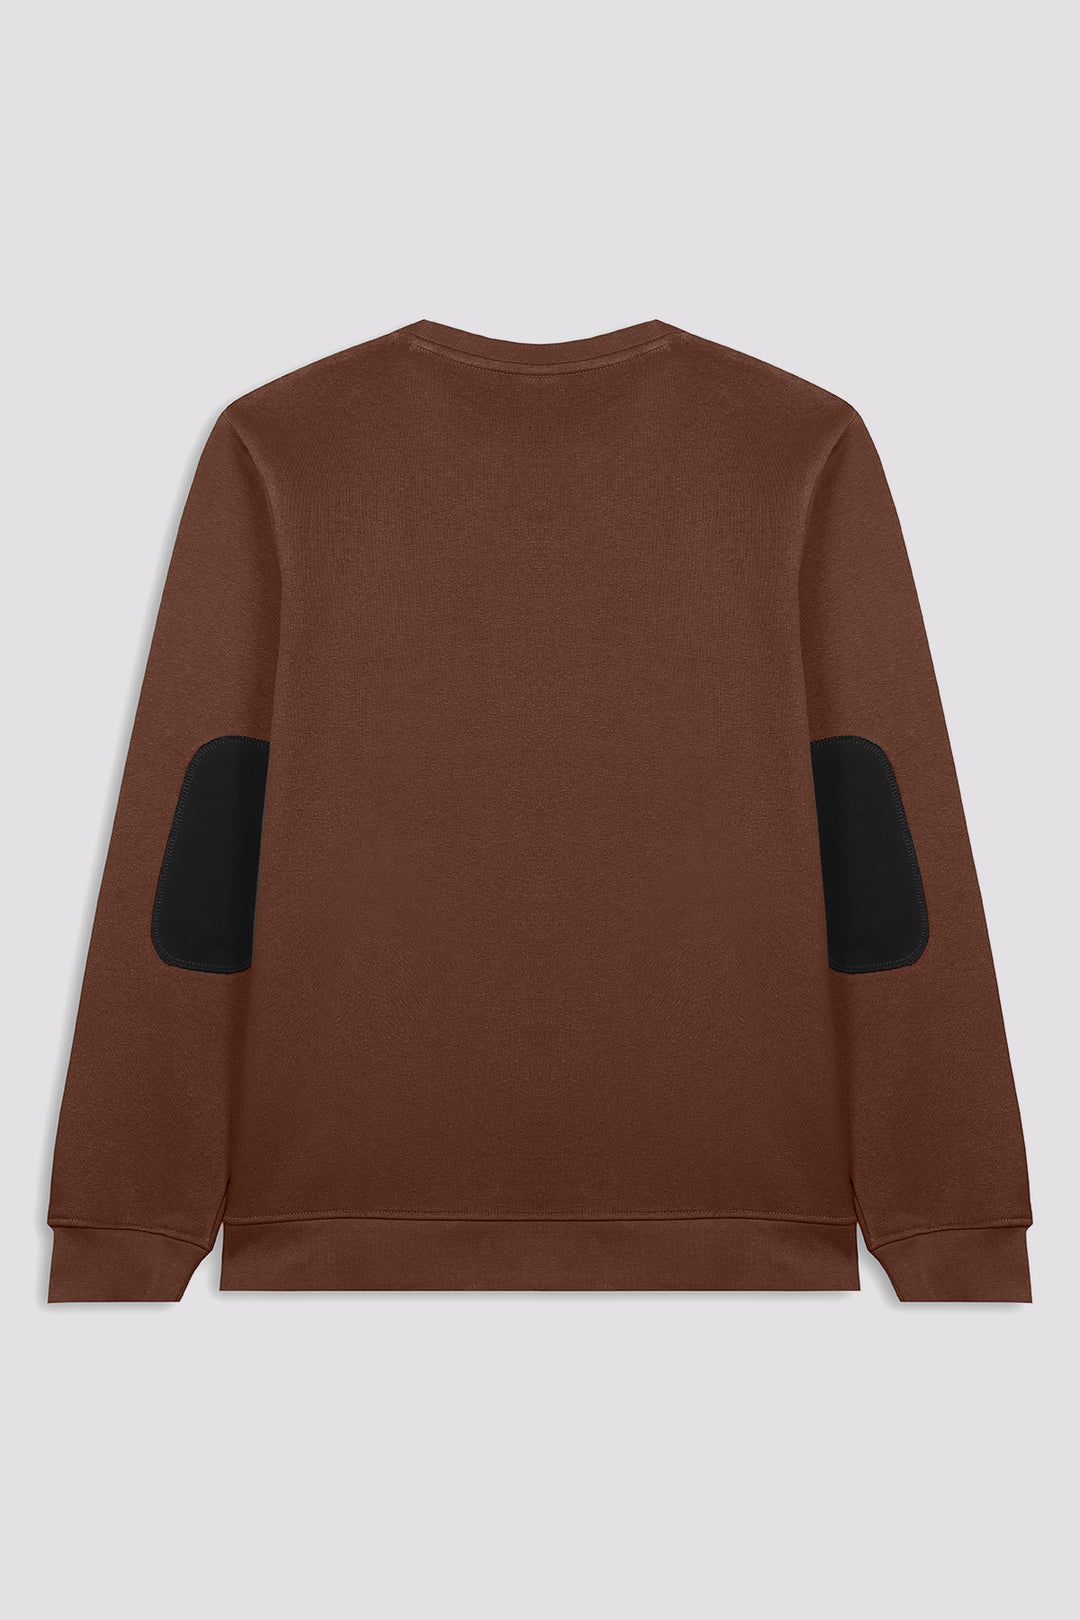 Brown Resolute Embroidered Sweatshirt - W22 - MSW057R